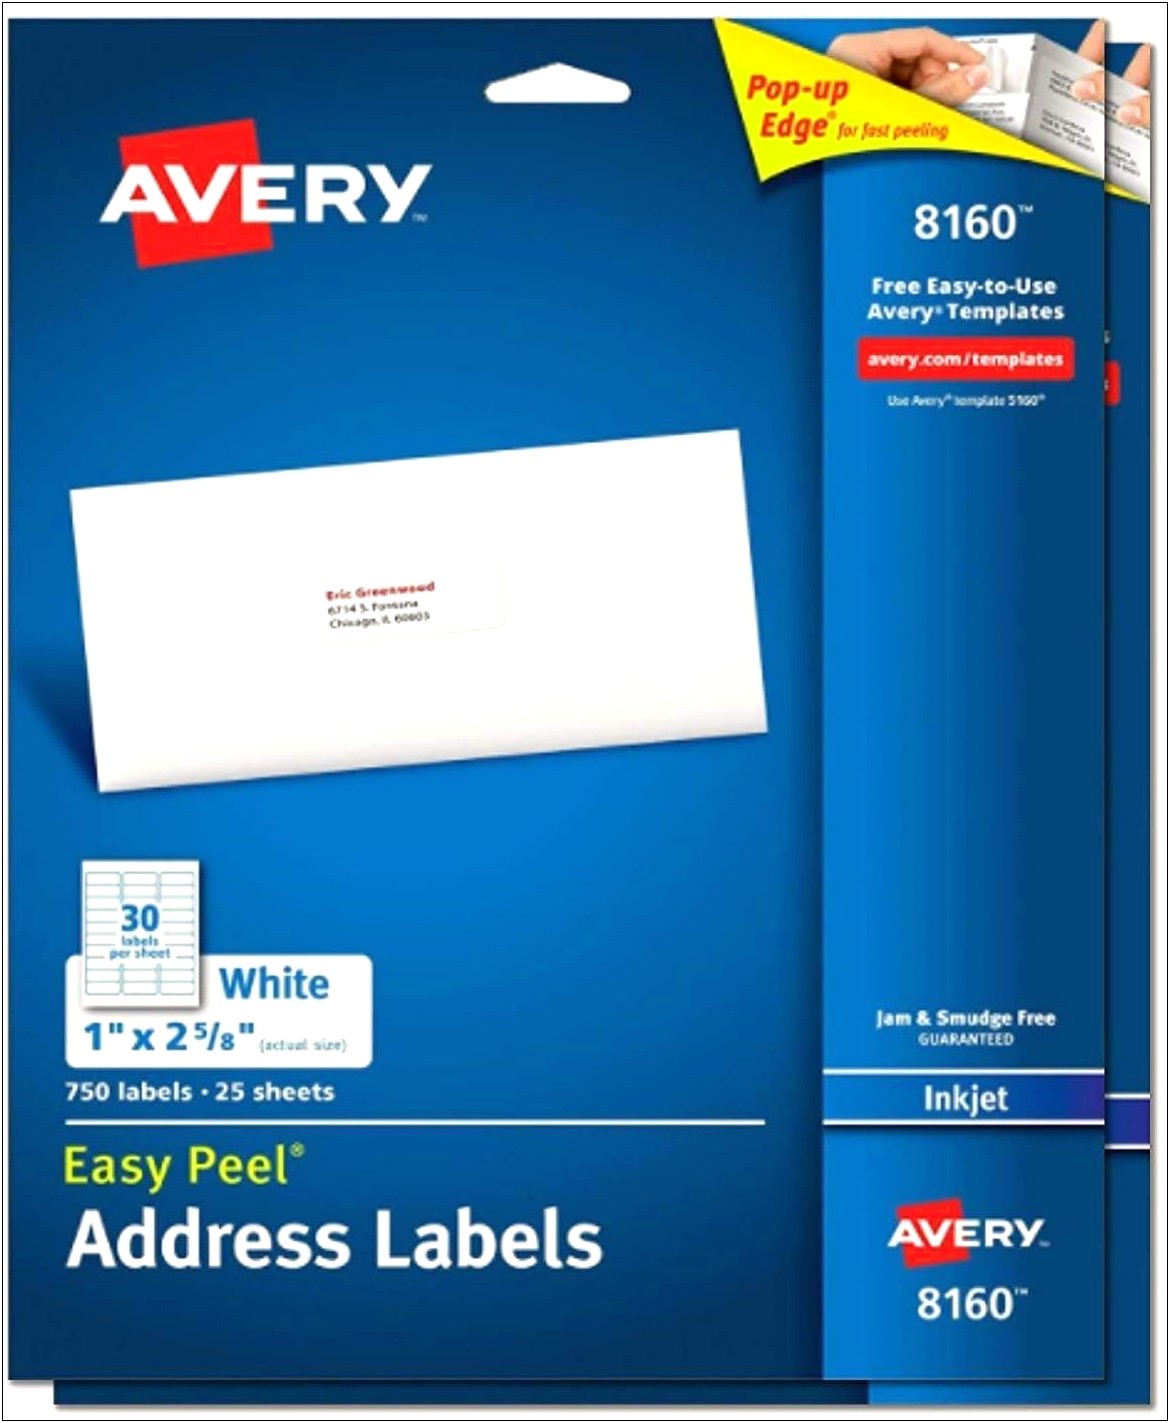 Free Downloadable Templates For Avery Inkjet Labels 8160